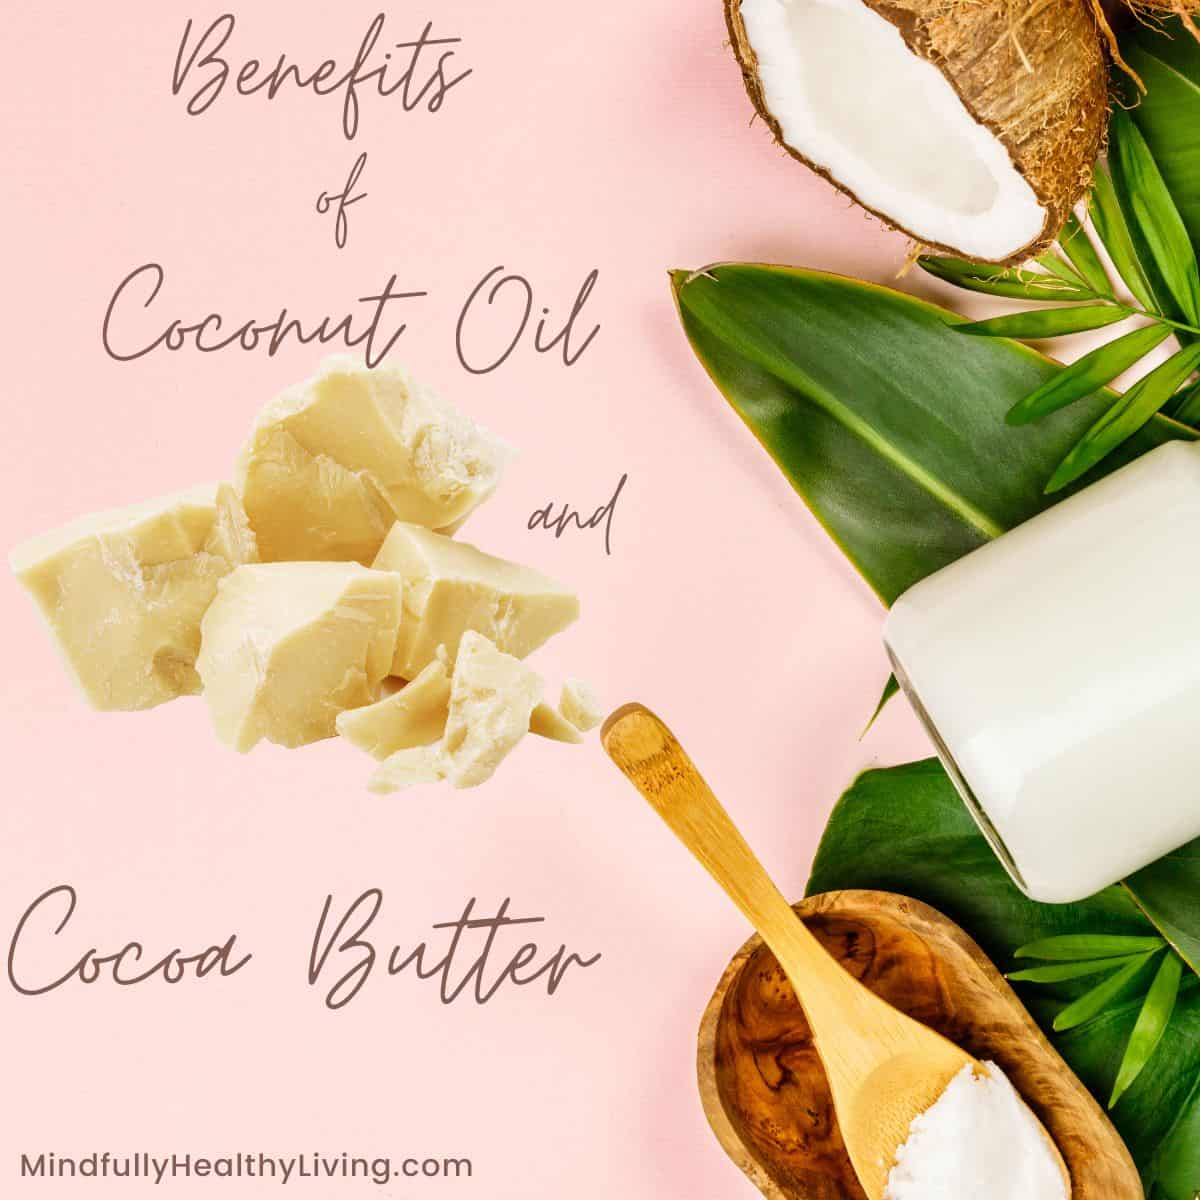 A pink background with brown cursive writing saying Benefits of Coconut Oil and Cocoa Butter with print at the bottom that reads Mindfullyhealthyliving.com in the middle is an ivory-colored pile of raw cocoa butter. to the left side of the photo is a cracked open coconut, coconut tree leaves, and a wooden spoon and bowl with a scoop of coconut oil on it. Also, next to the spoon is a glass jar filled with coconut oil laying diagnally.